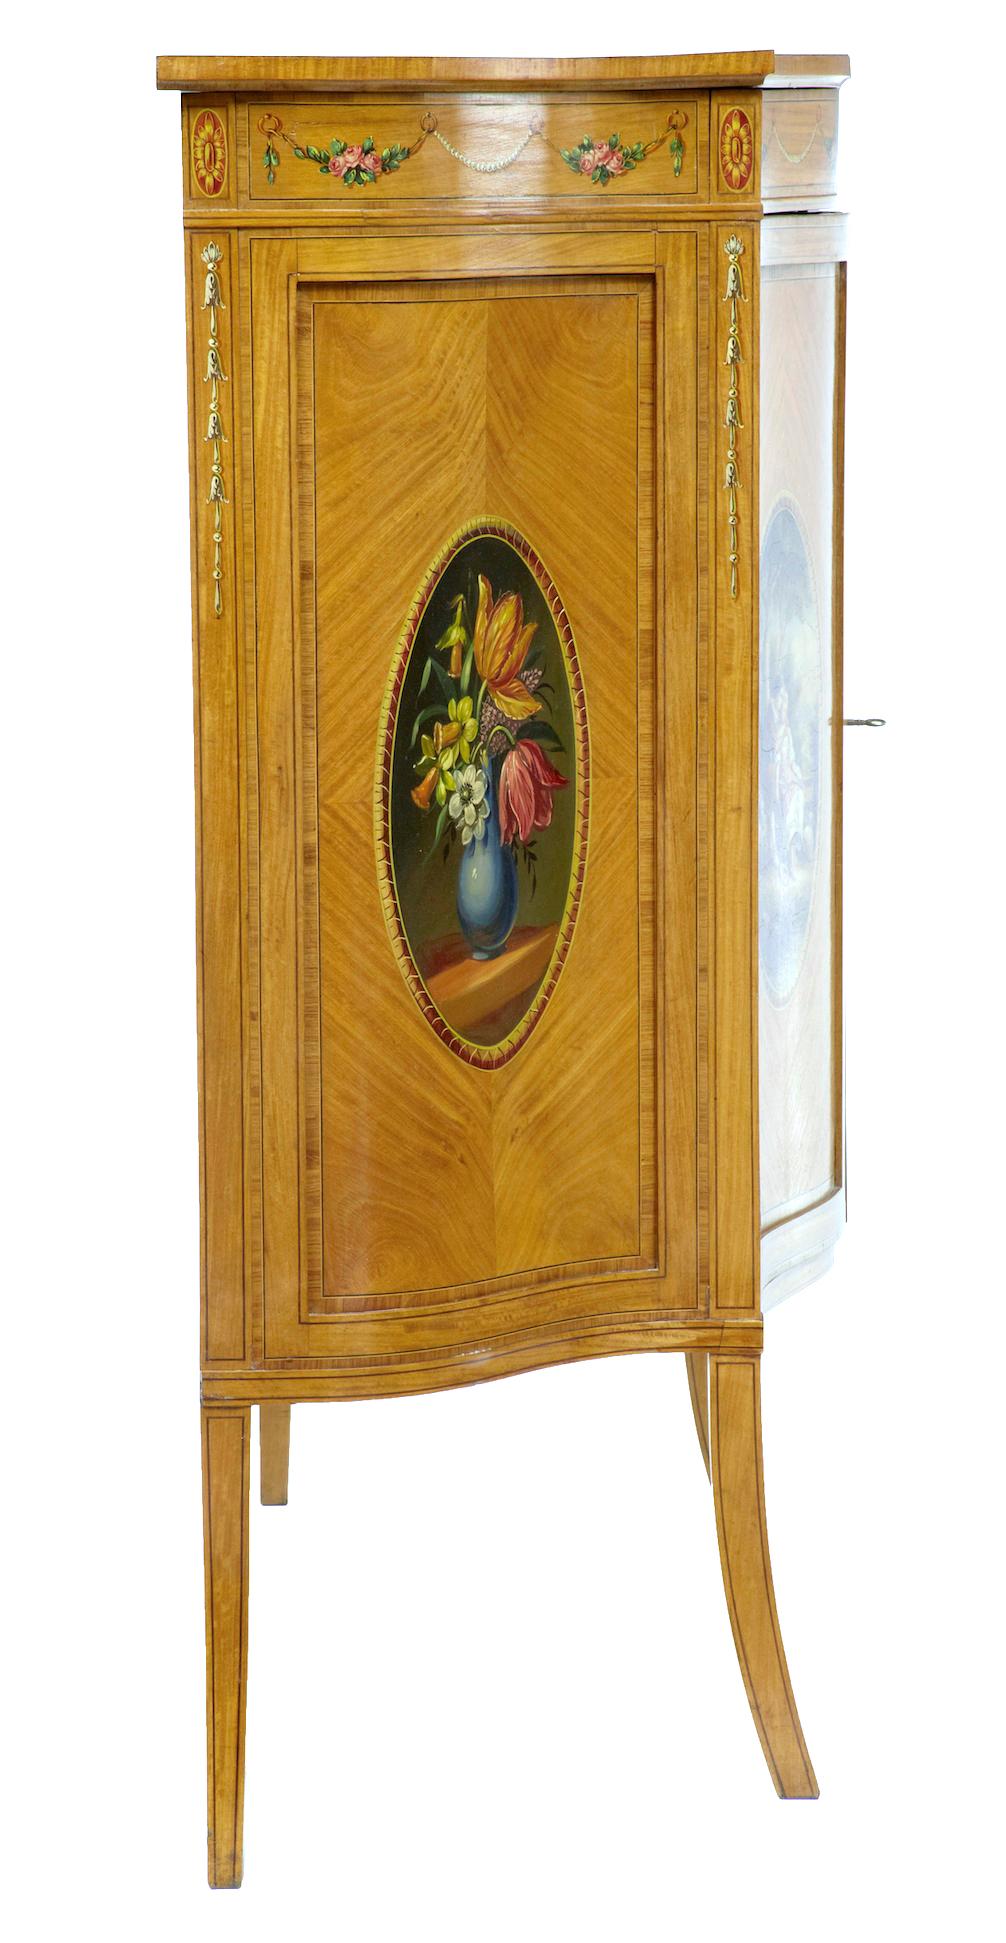 Inlay Late 19th Century Sheraton Revival Satinwood Inlaid and Painted Cabinet